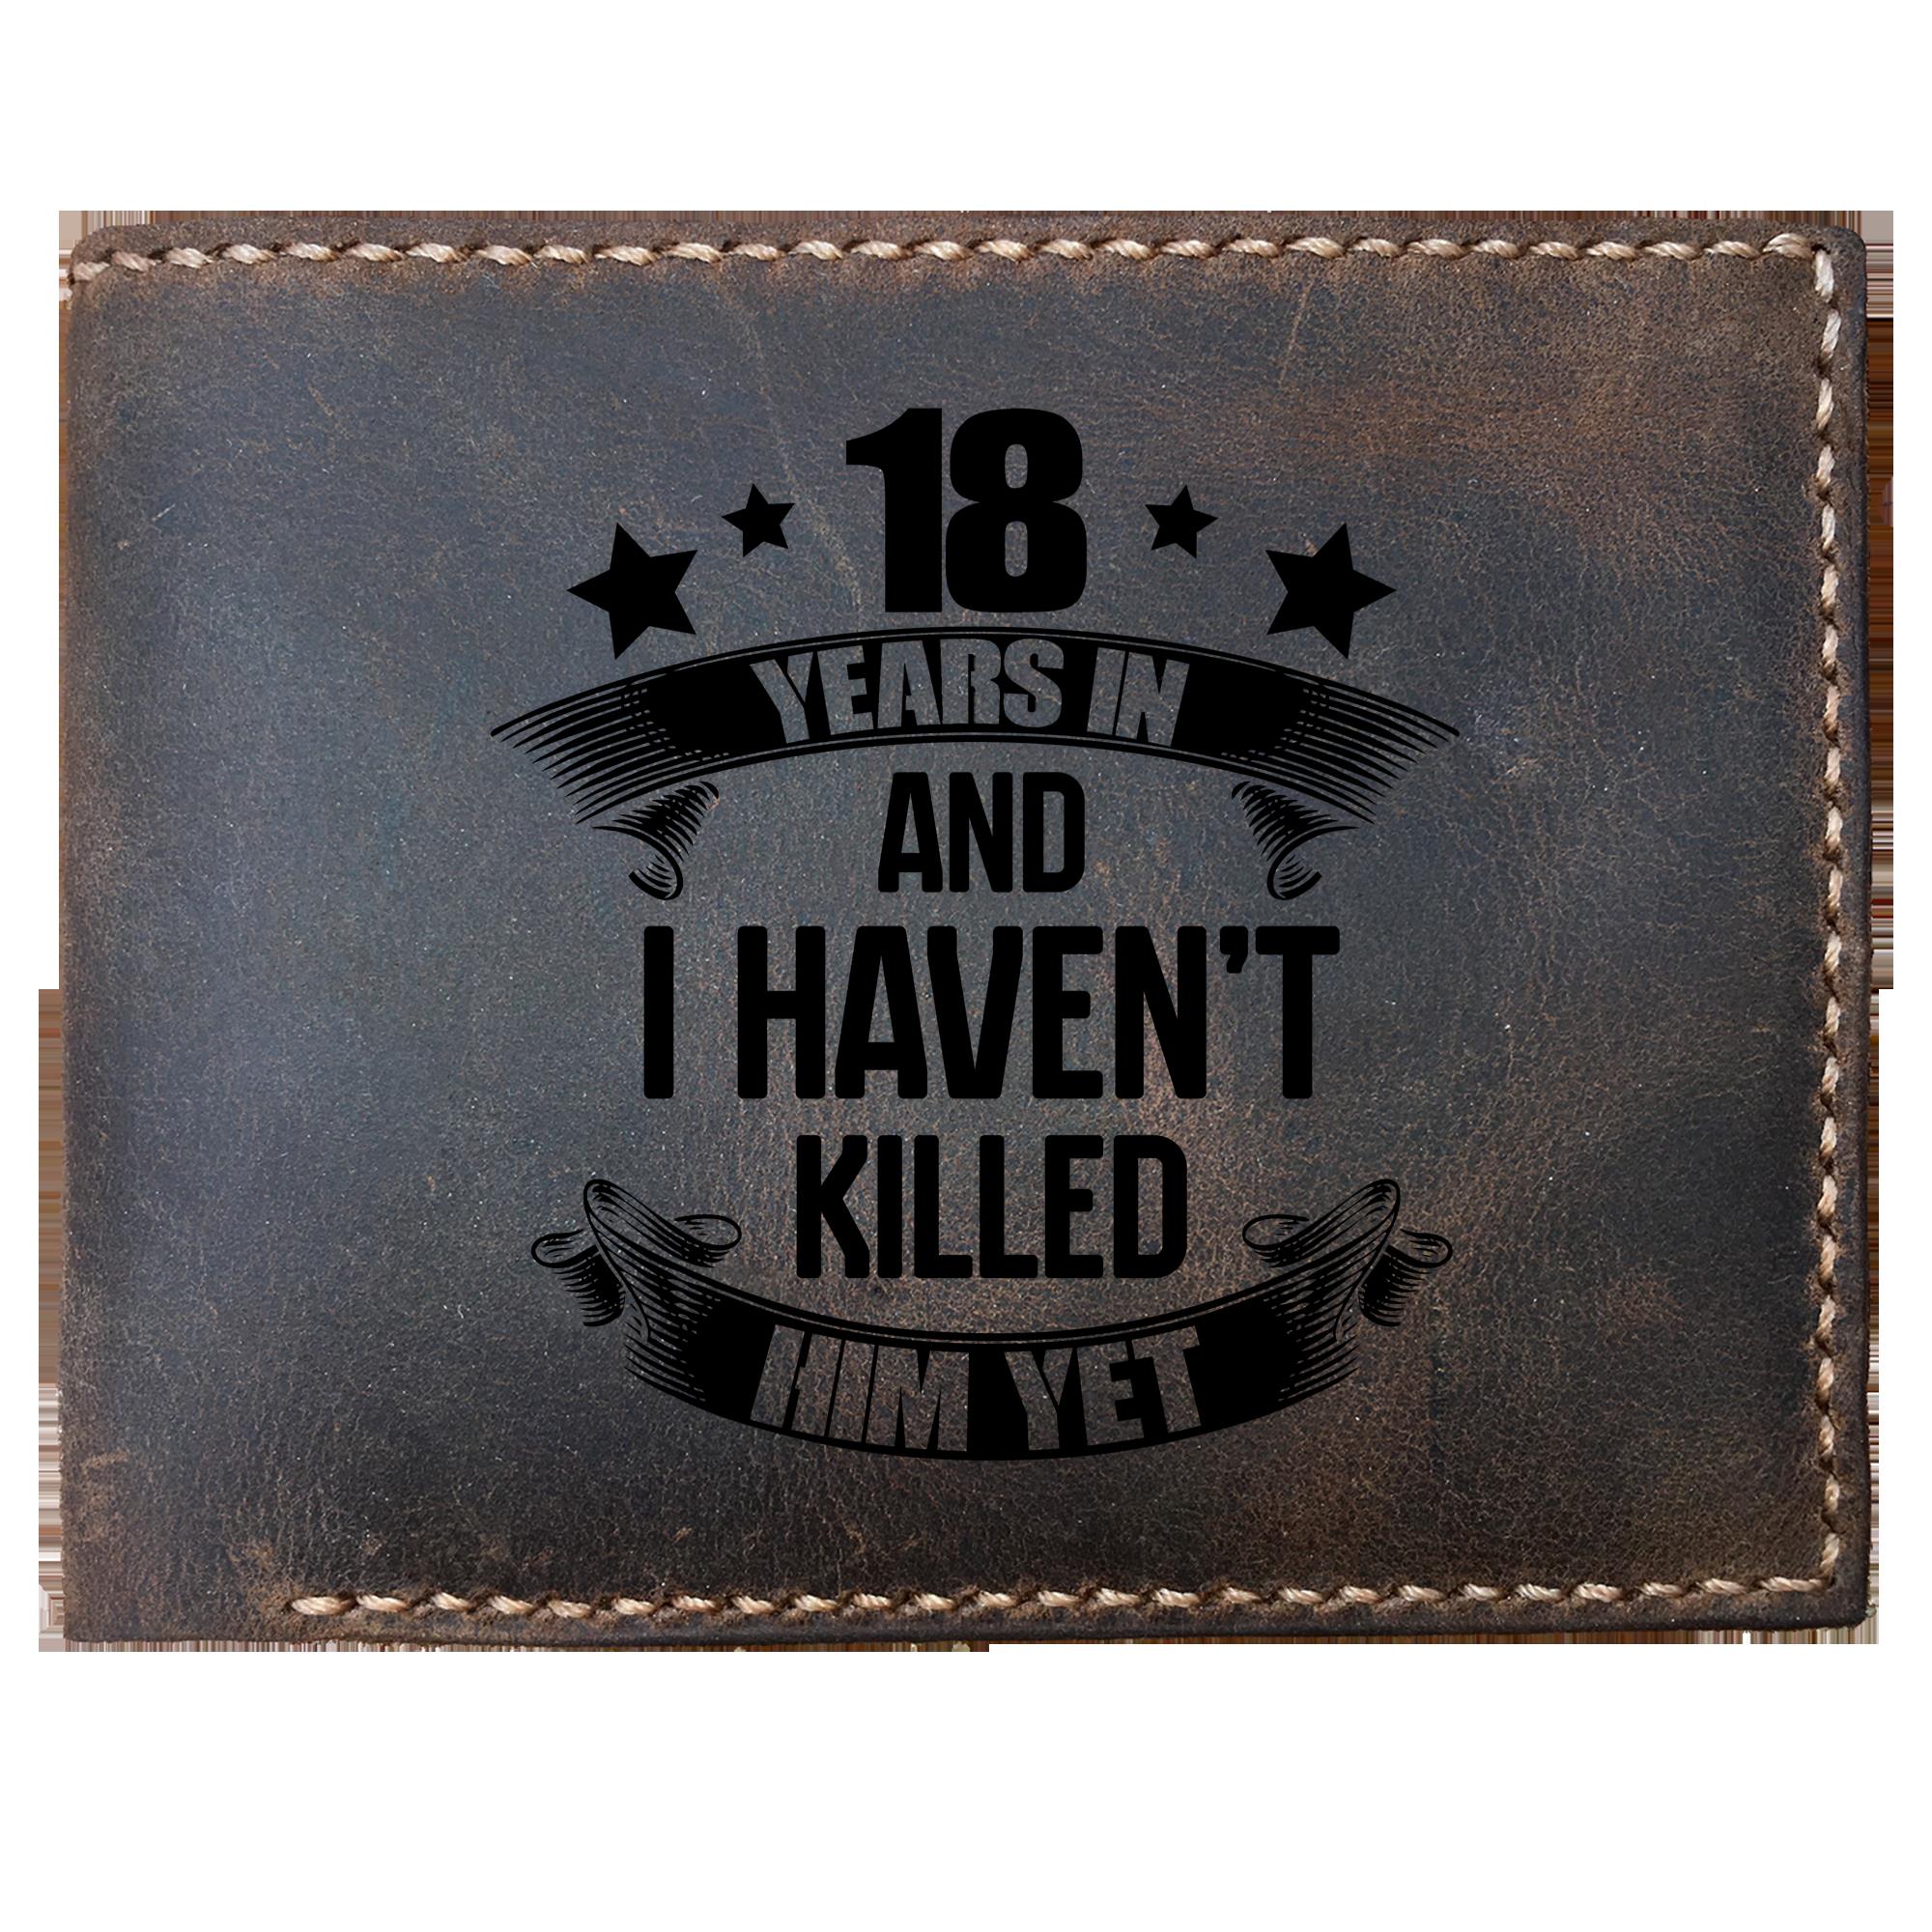 Skitongifts Funny Custom Laser Engraved Bifold Leather Wallet For Men, Great 18 Years Wedding Anniversary For Wife, Husband